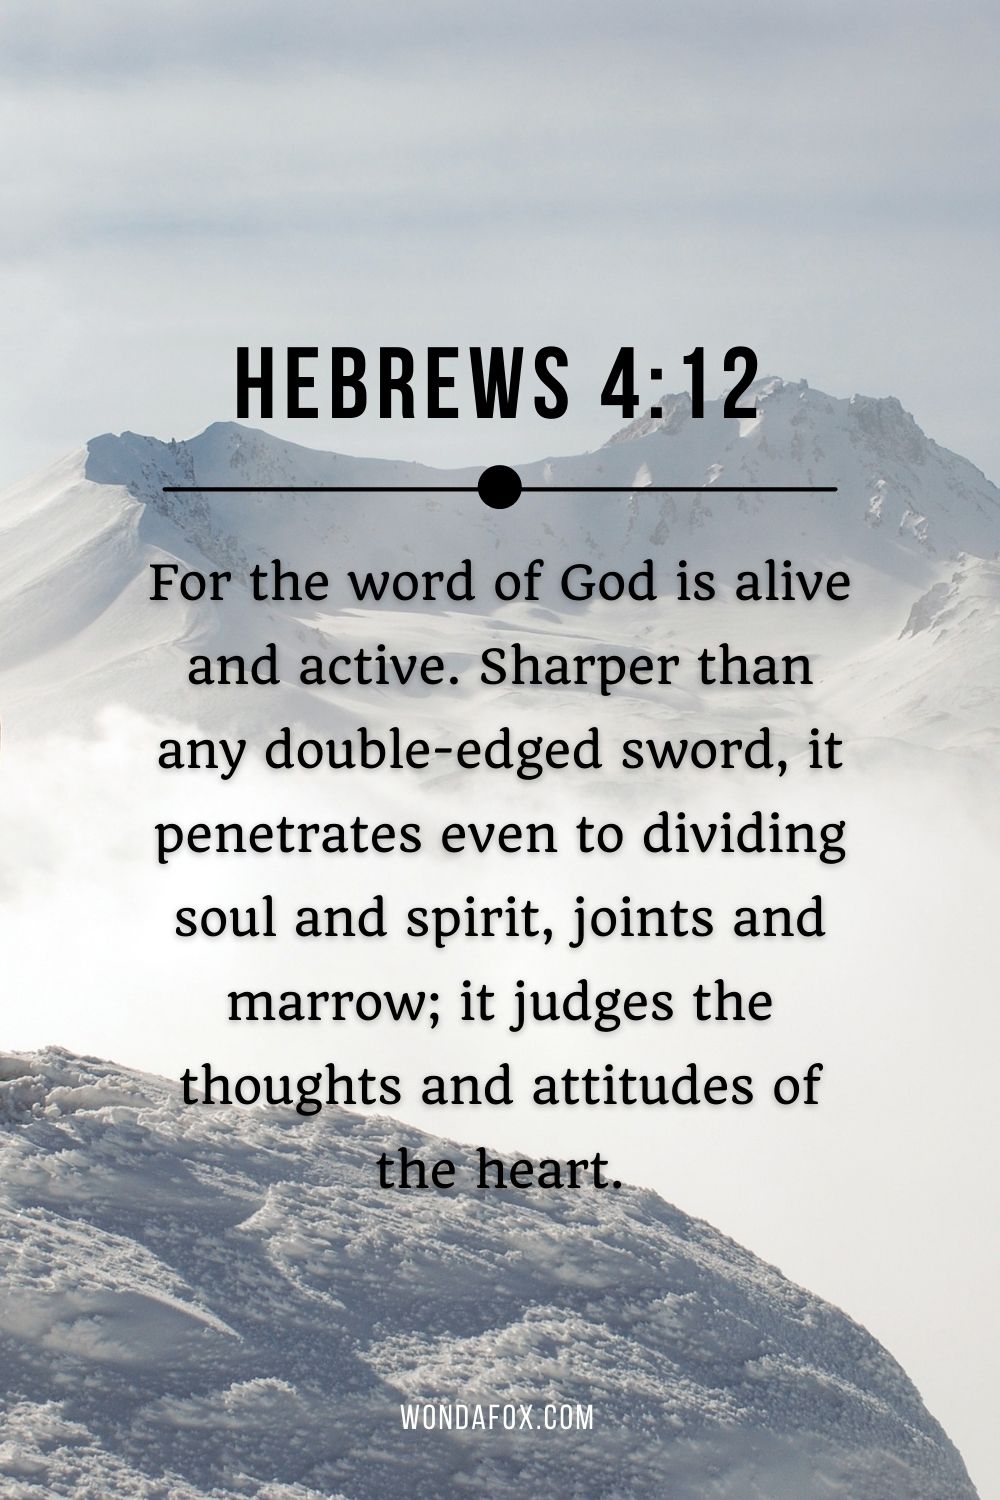 For the word of God is alive and active. Sharper than any double-edged sword, it penetrates even to dividing soul and spirit, joints and marrow; it judges the thoughts and attitudes of the heart.